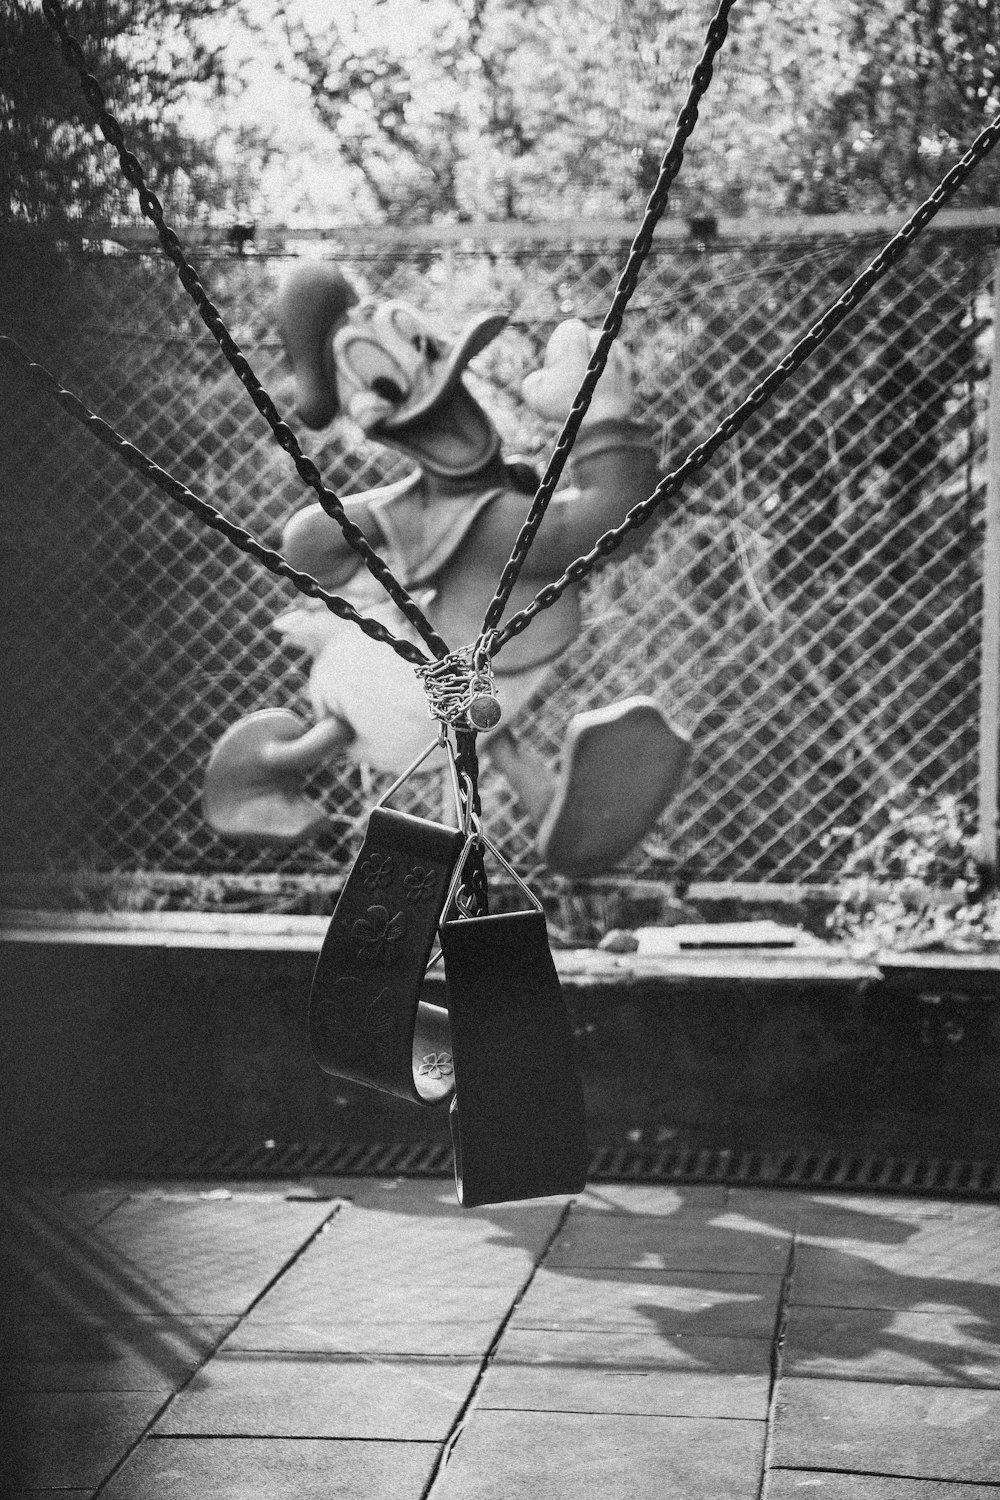 a black and white photo of a swing set